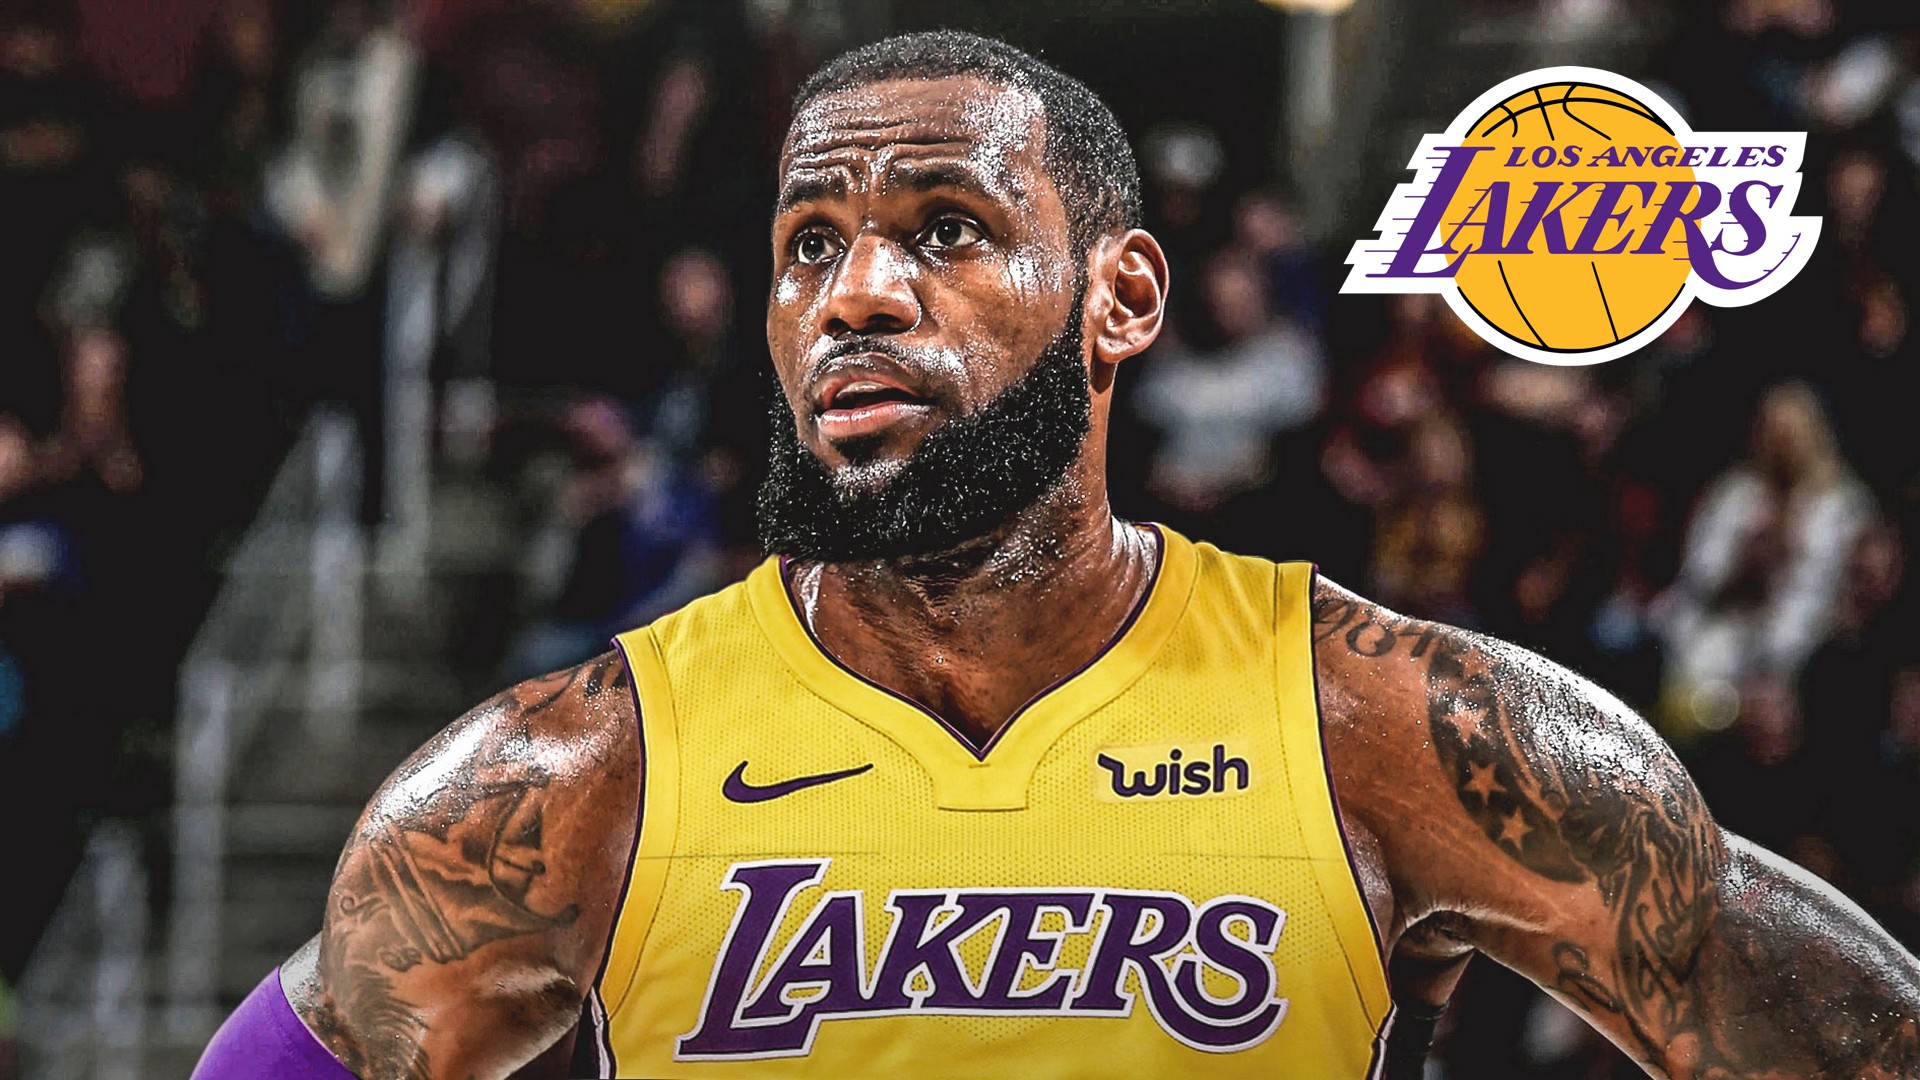 LeBron James Lakers Jersey Wallpaper HD with image dimensions 1920x1080 pixel. You can make this wallpaper for your Desktop Computer Backgrounds, Windows or Mac Screensavers, iPhone Lock screen, Tablet or Android and another Mobile Phone device